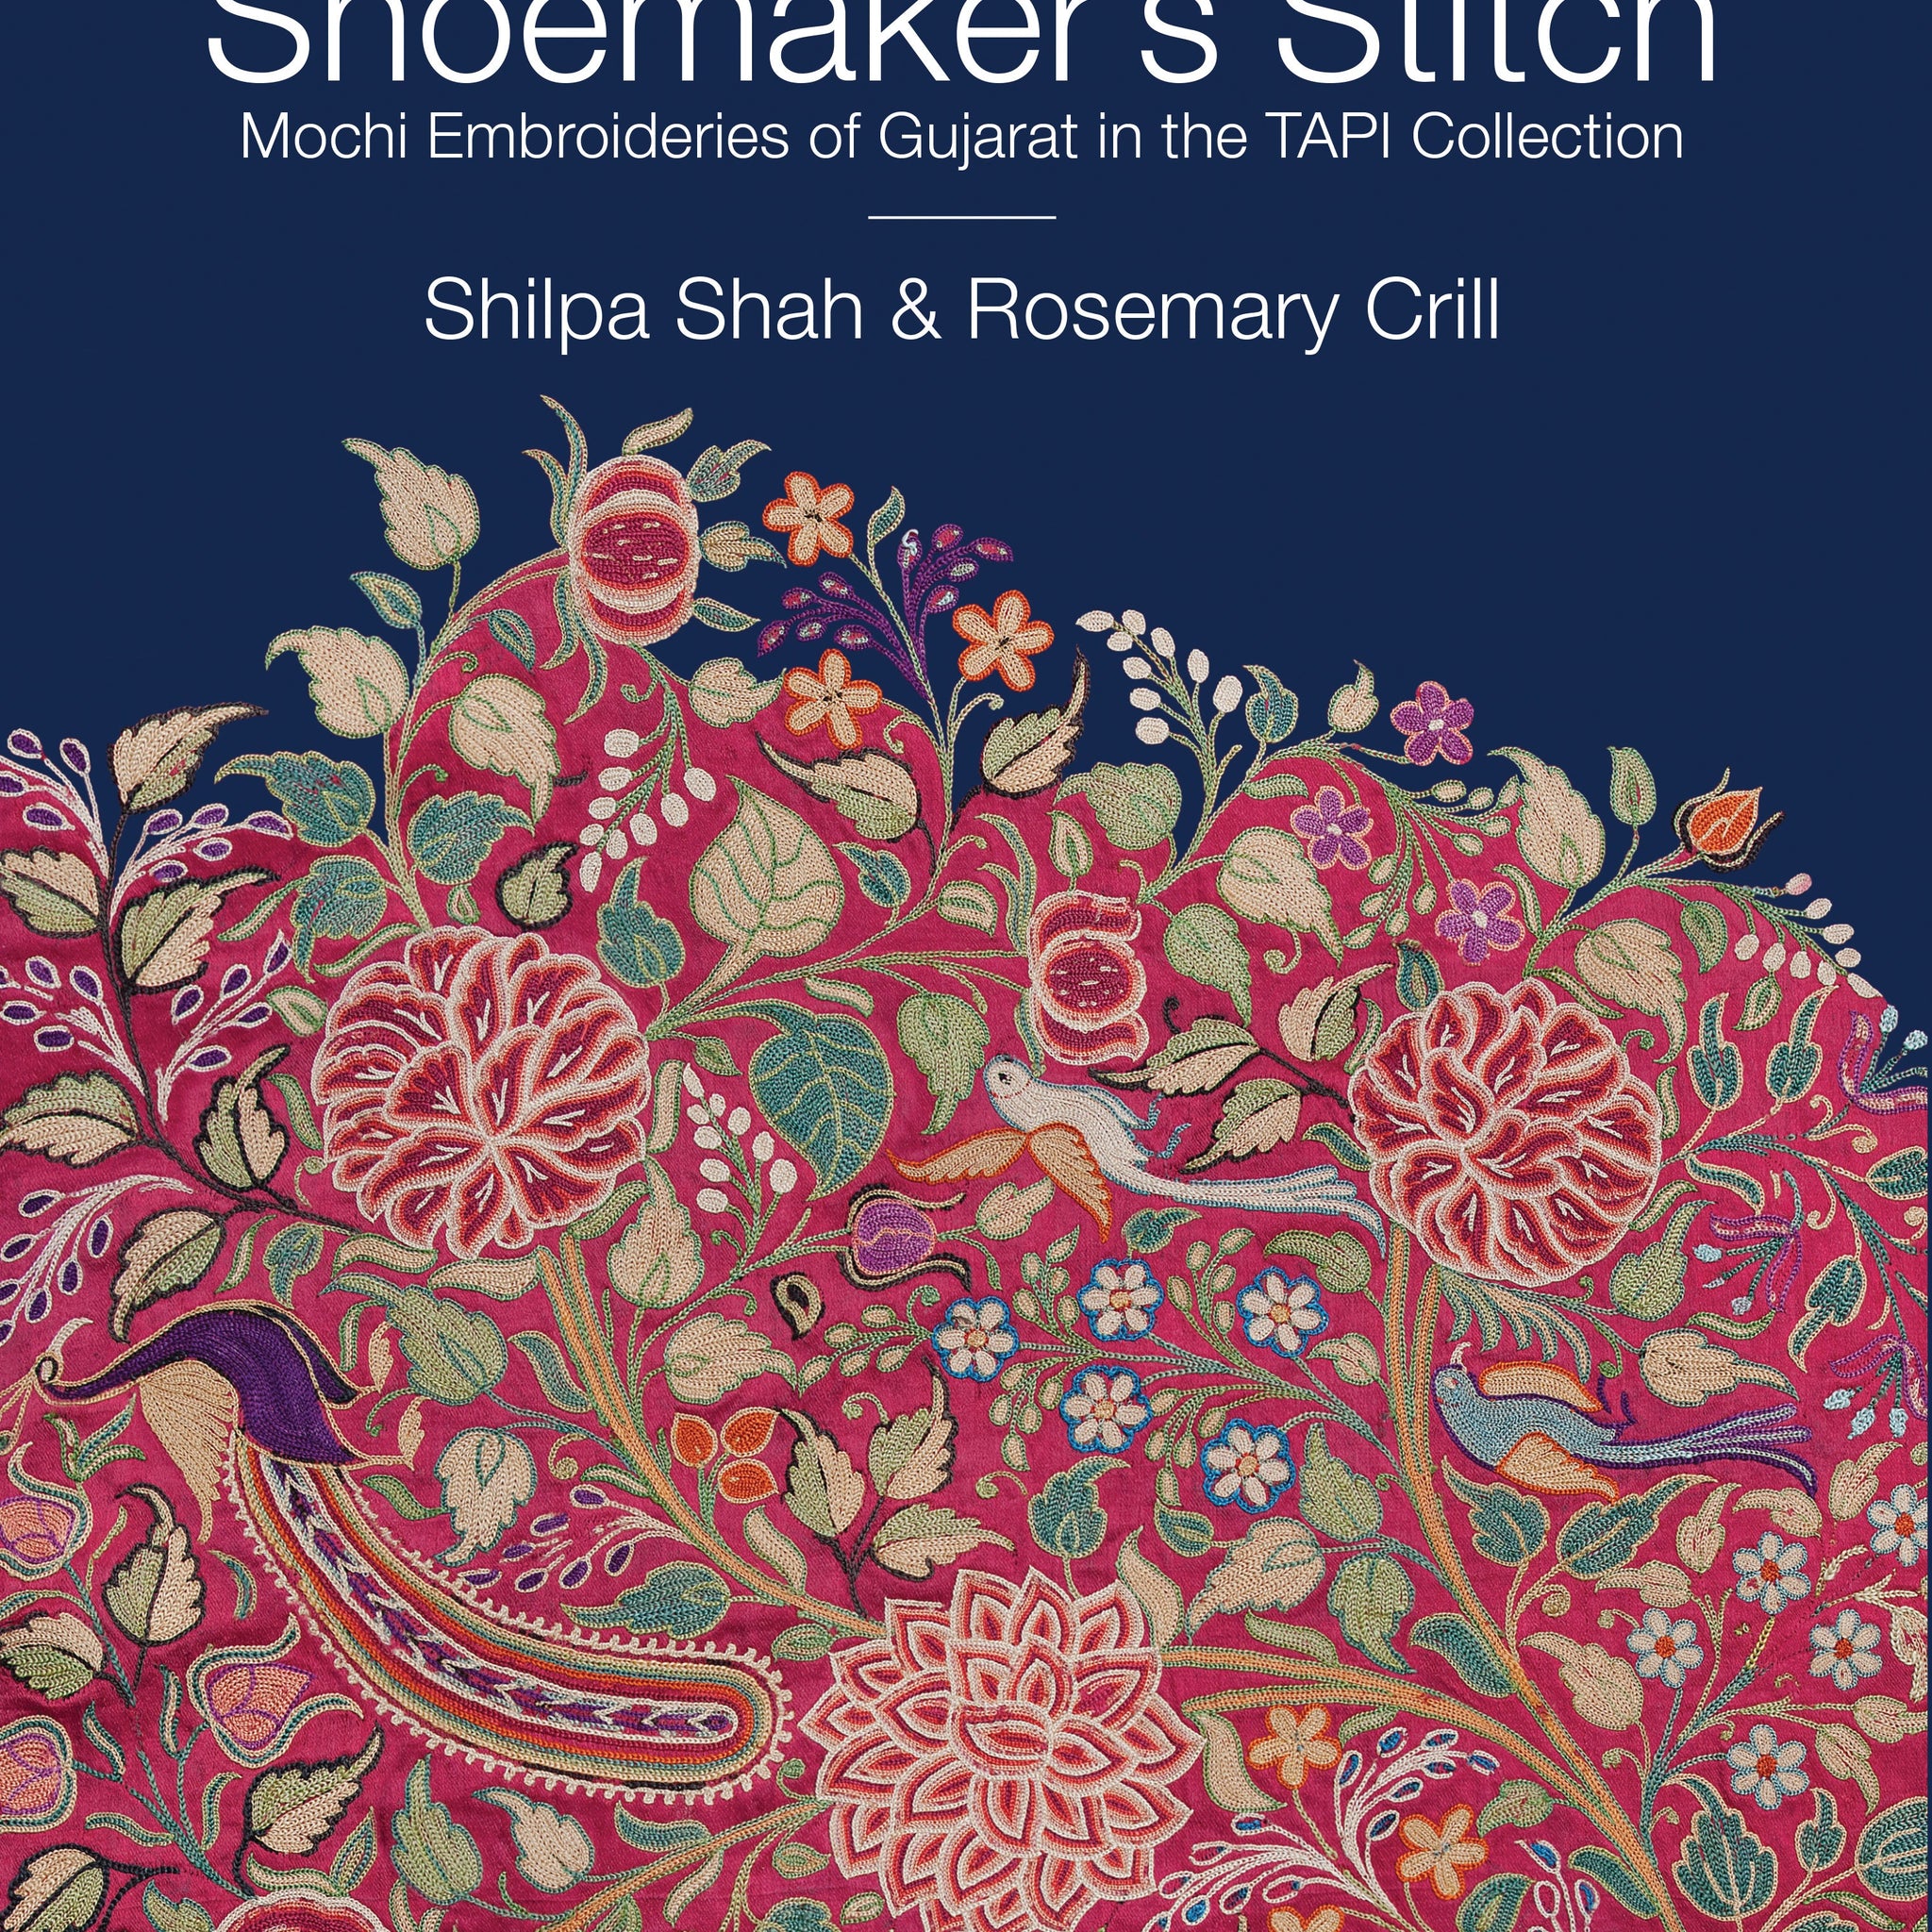 The Shoemaker's Stitch: Mochi Embroideries of Gujarat in the TAPI Collection (H.B)